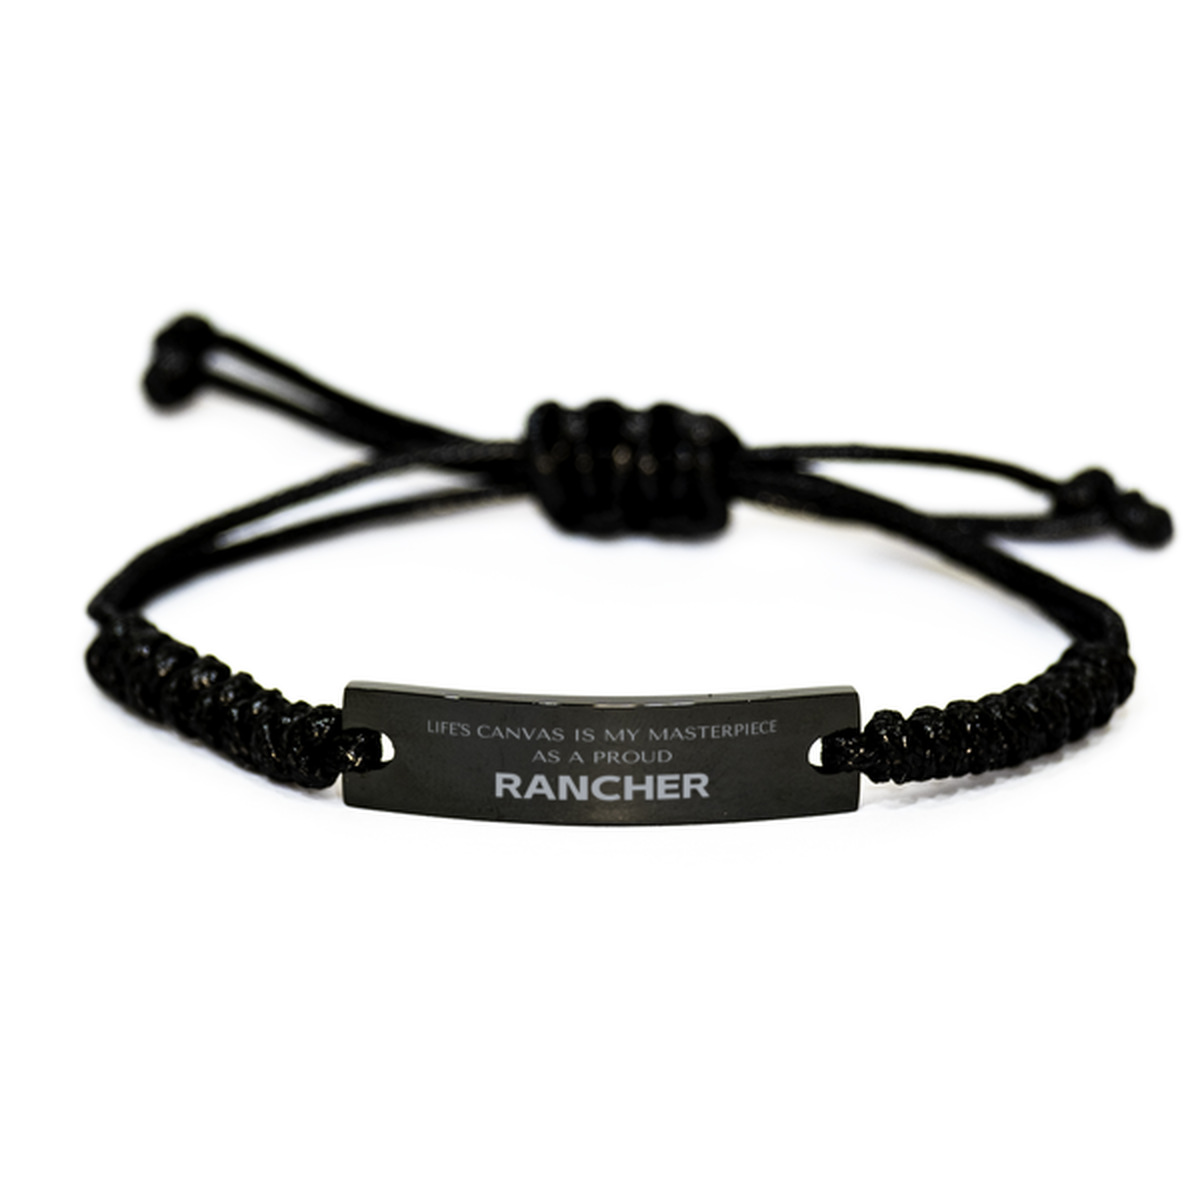 Proud Rancher Gifts, Life's canvas is my masterpiece, Epic Birthday Christmas Unique Black Rope Bracelet For Rancher, Coworkers, Men, Women, Friends